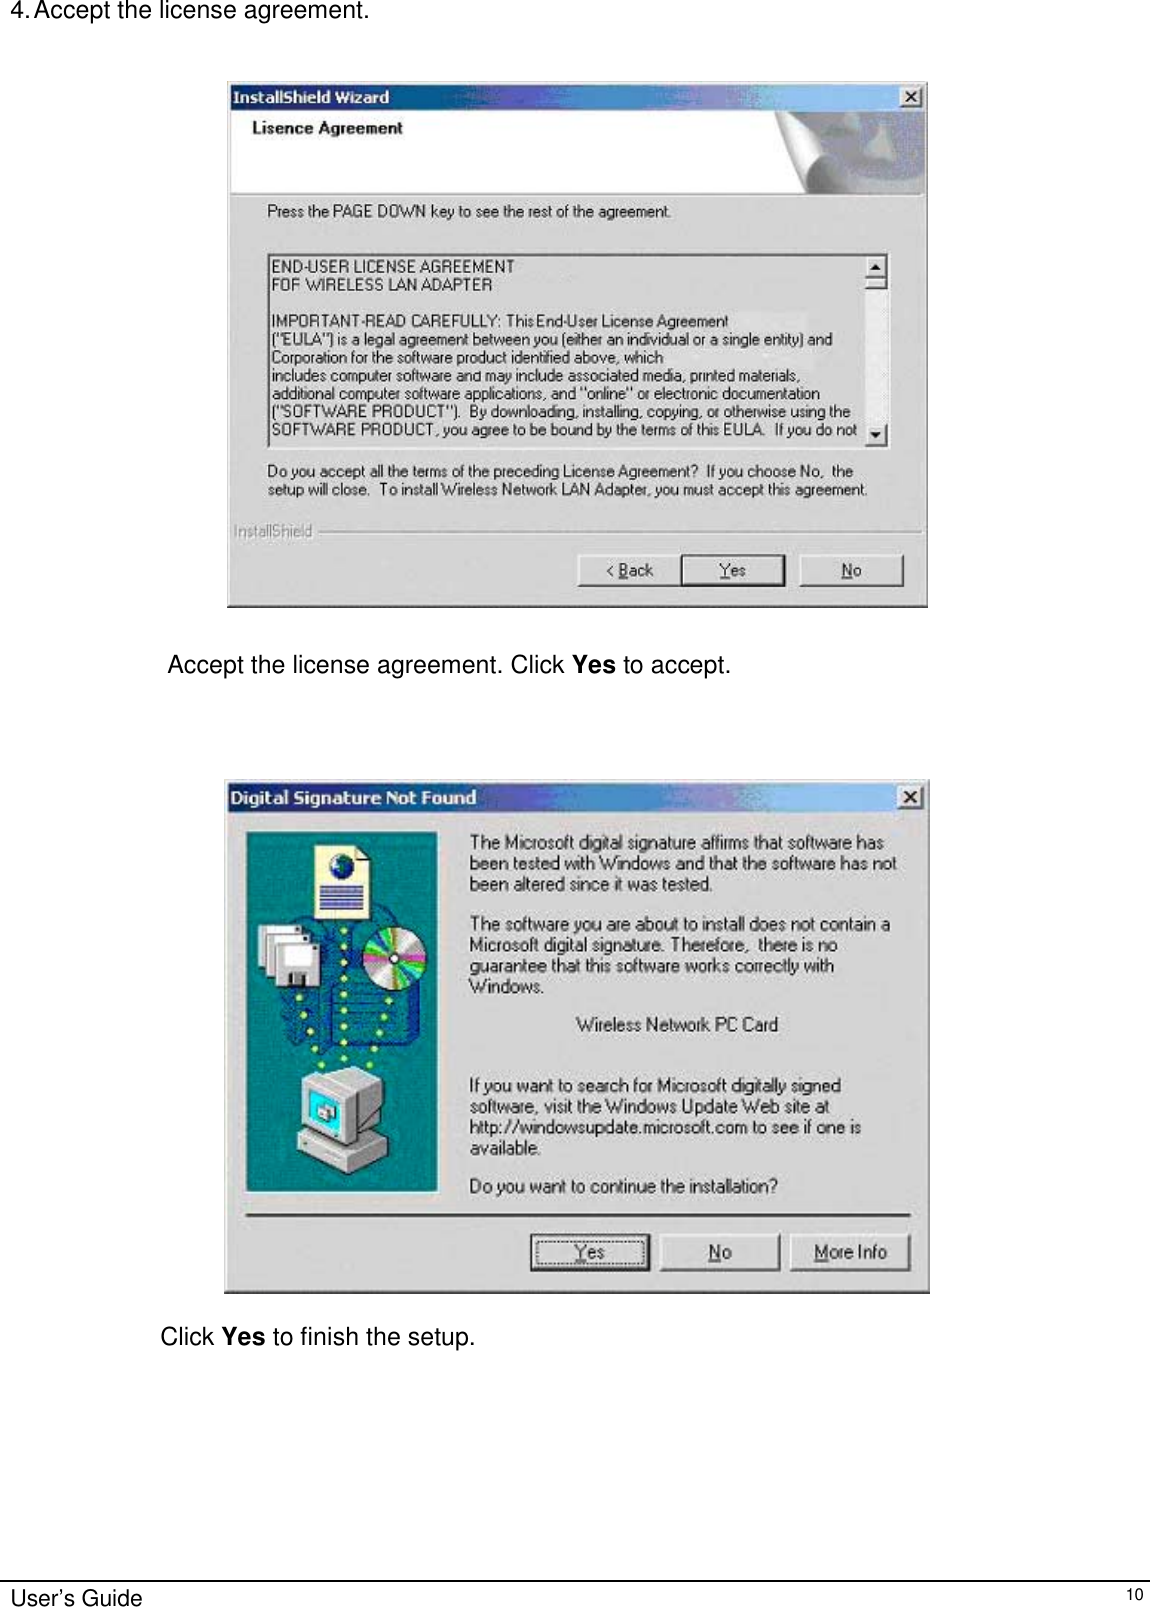                                                                                                                                                             User’s Guide104. Accept the license agreement. Accept the license agreement. Click Yes to accept.                   Click Yes to finish the setup.